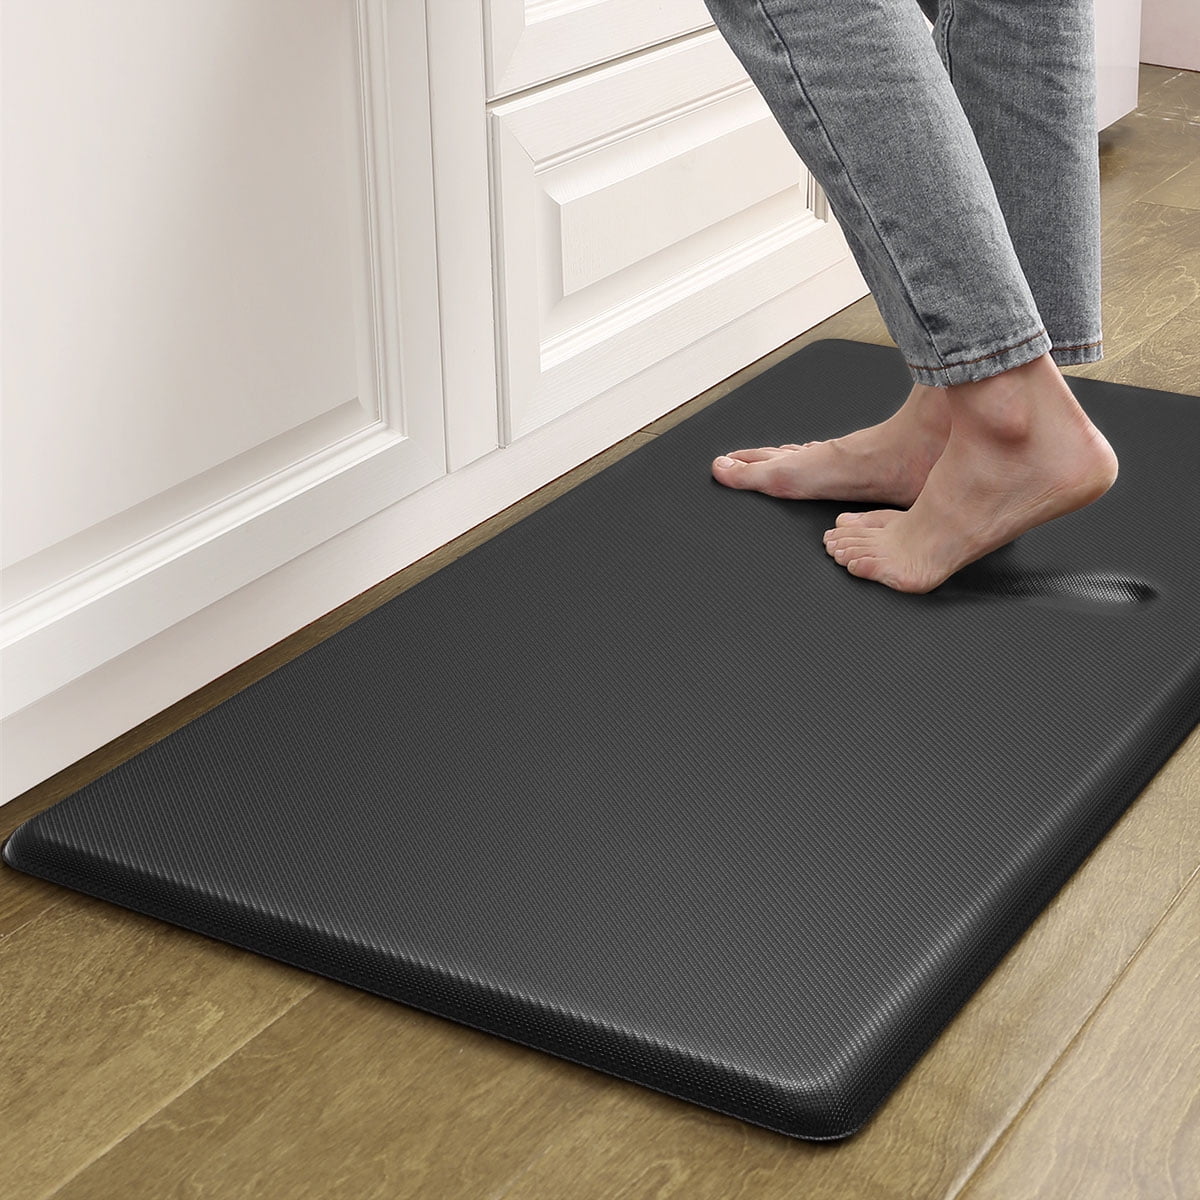 Cushioned Floor Mats For Kitchen Chef